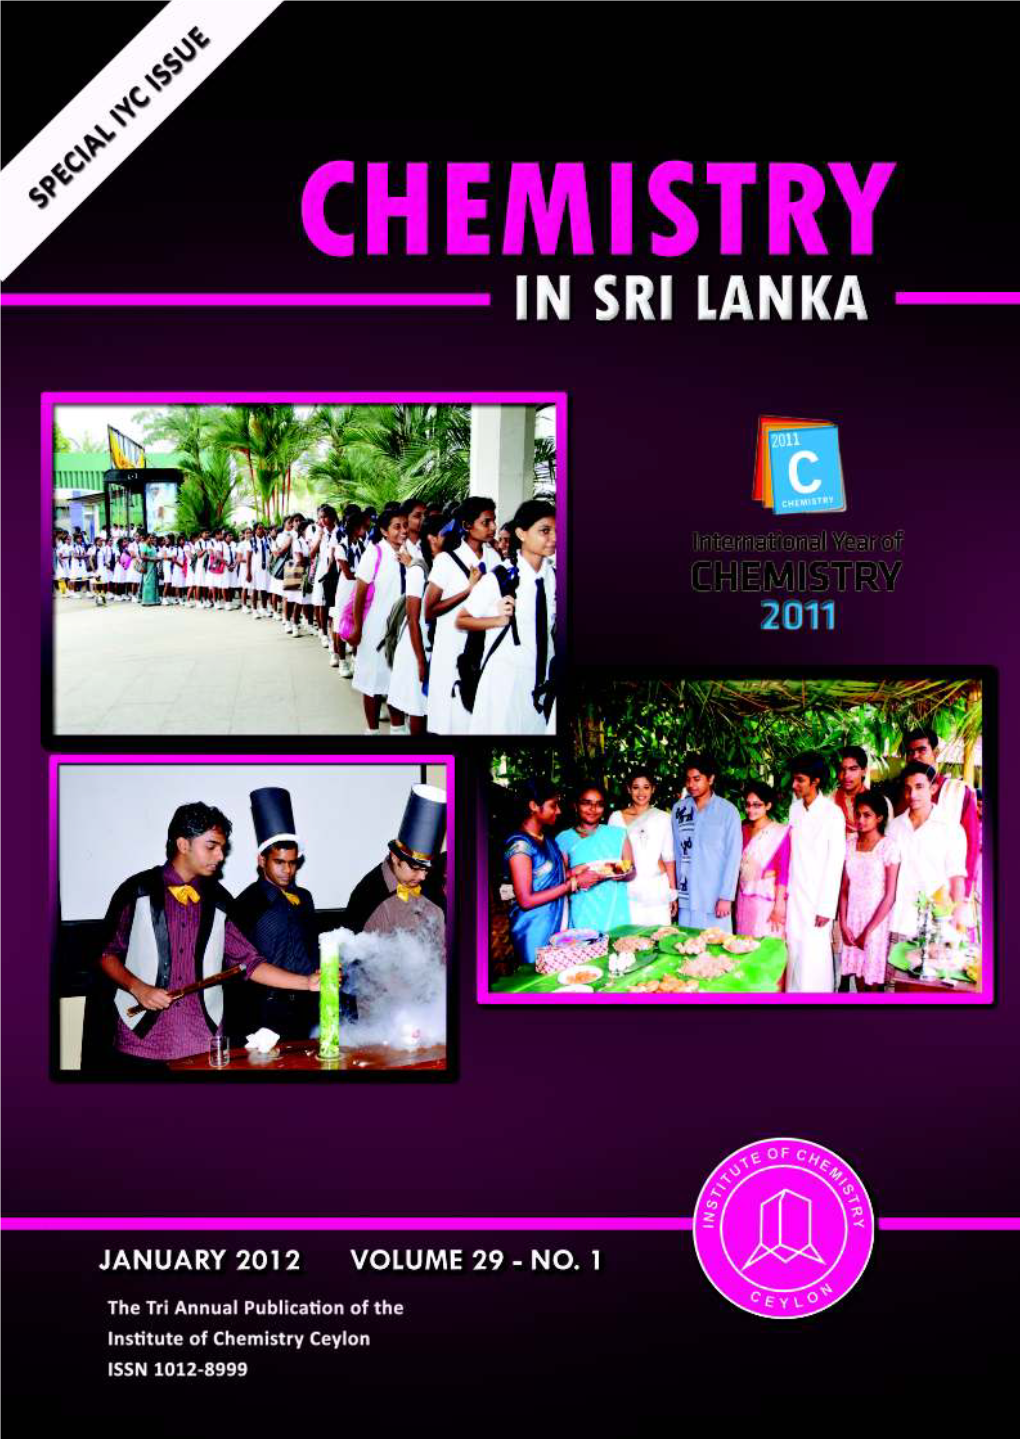 Chemistry in Sri Lanka ISSN 1012 - 8999 the Tri-Annual Publication of the Institute of Chemistry Ceylon Founded in 1971, Incorporated by Act of Parliament No